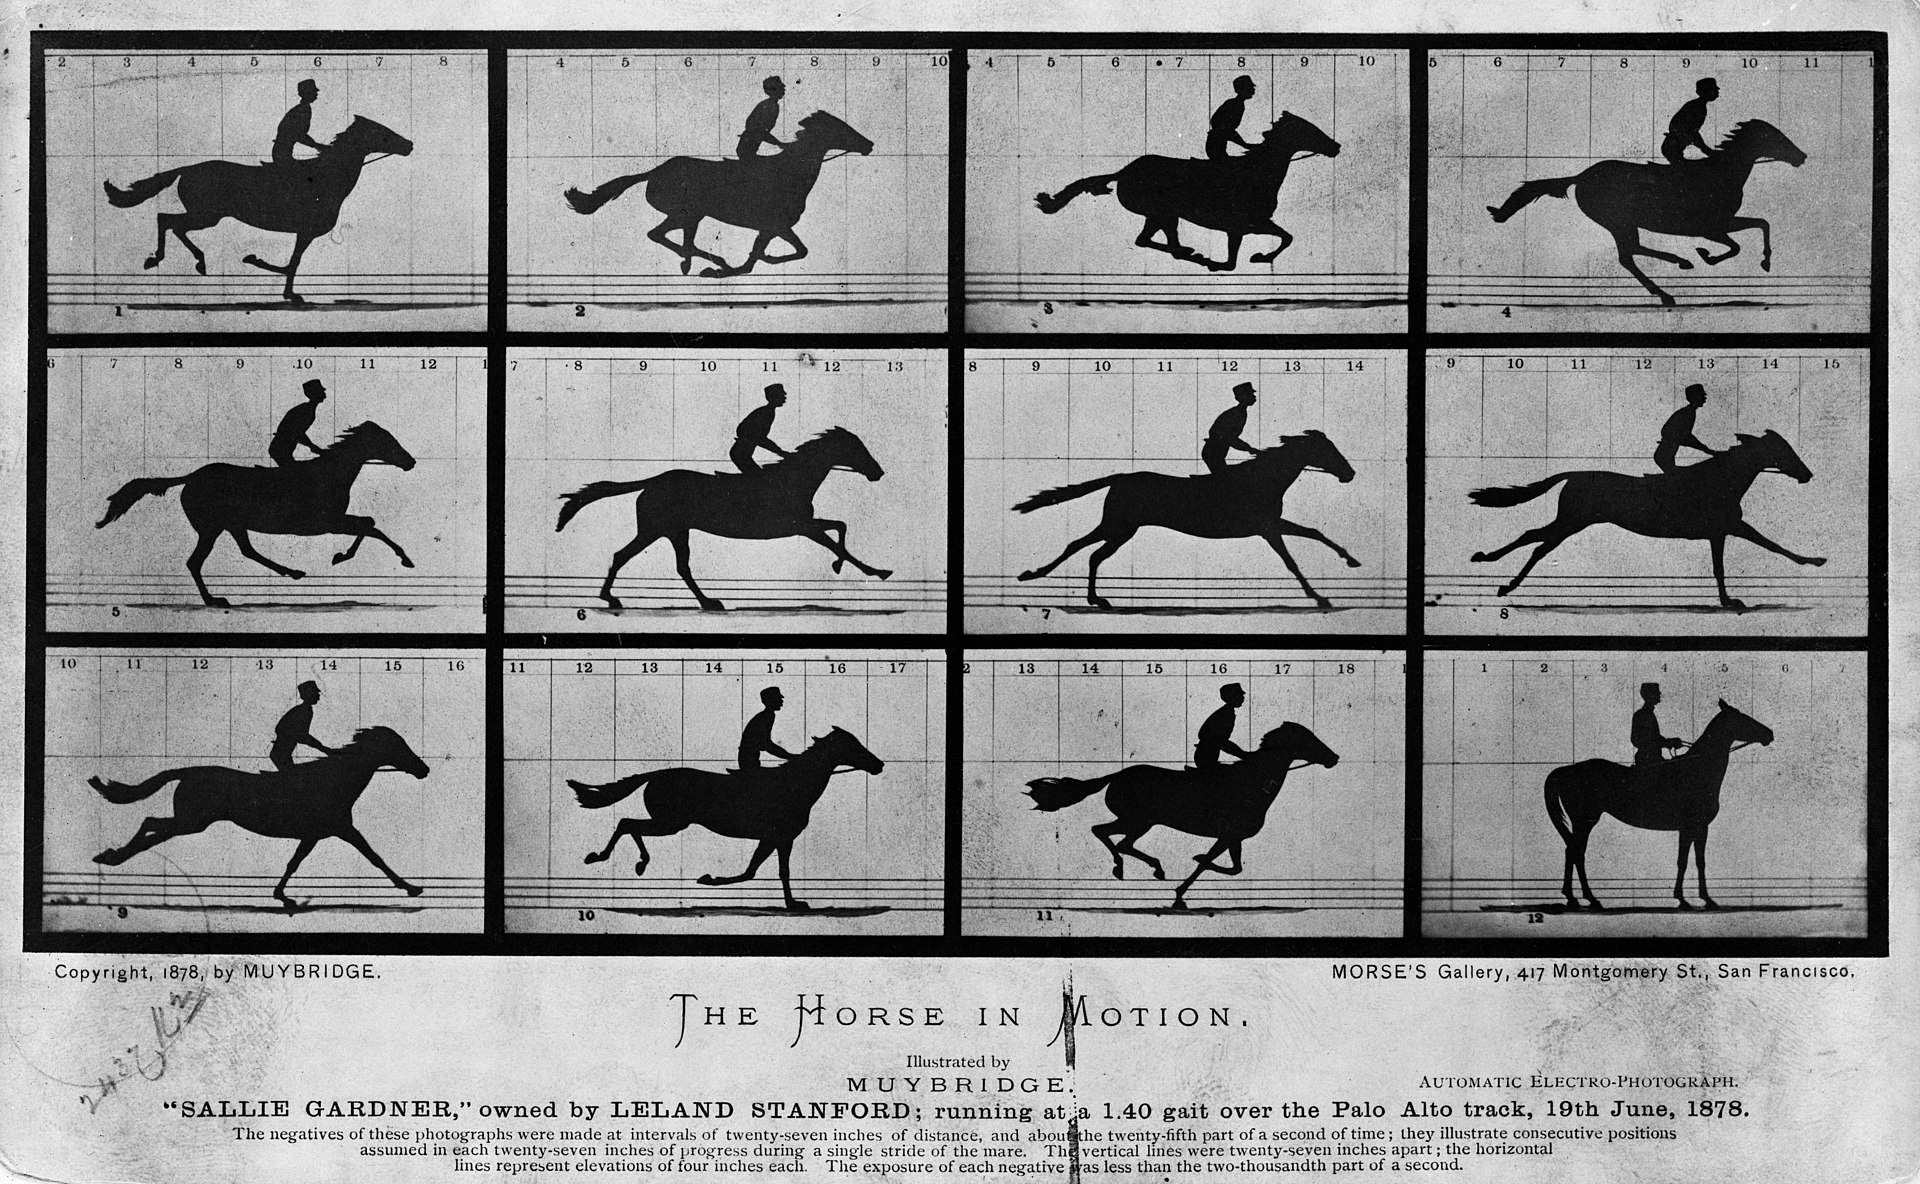 The horse in motion by Eadweard Muybridge as one of the first small multiple technique